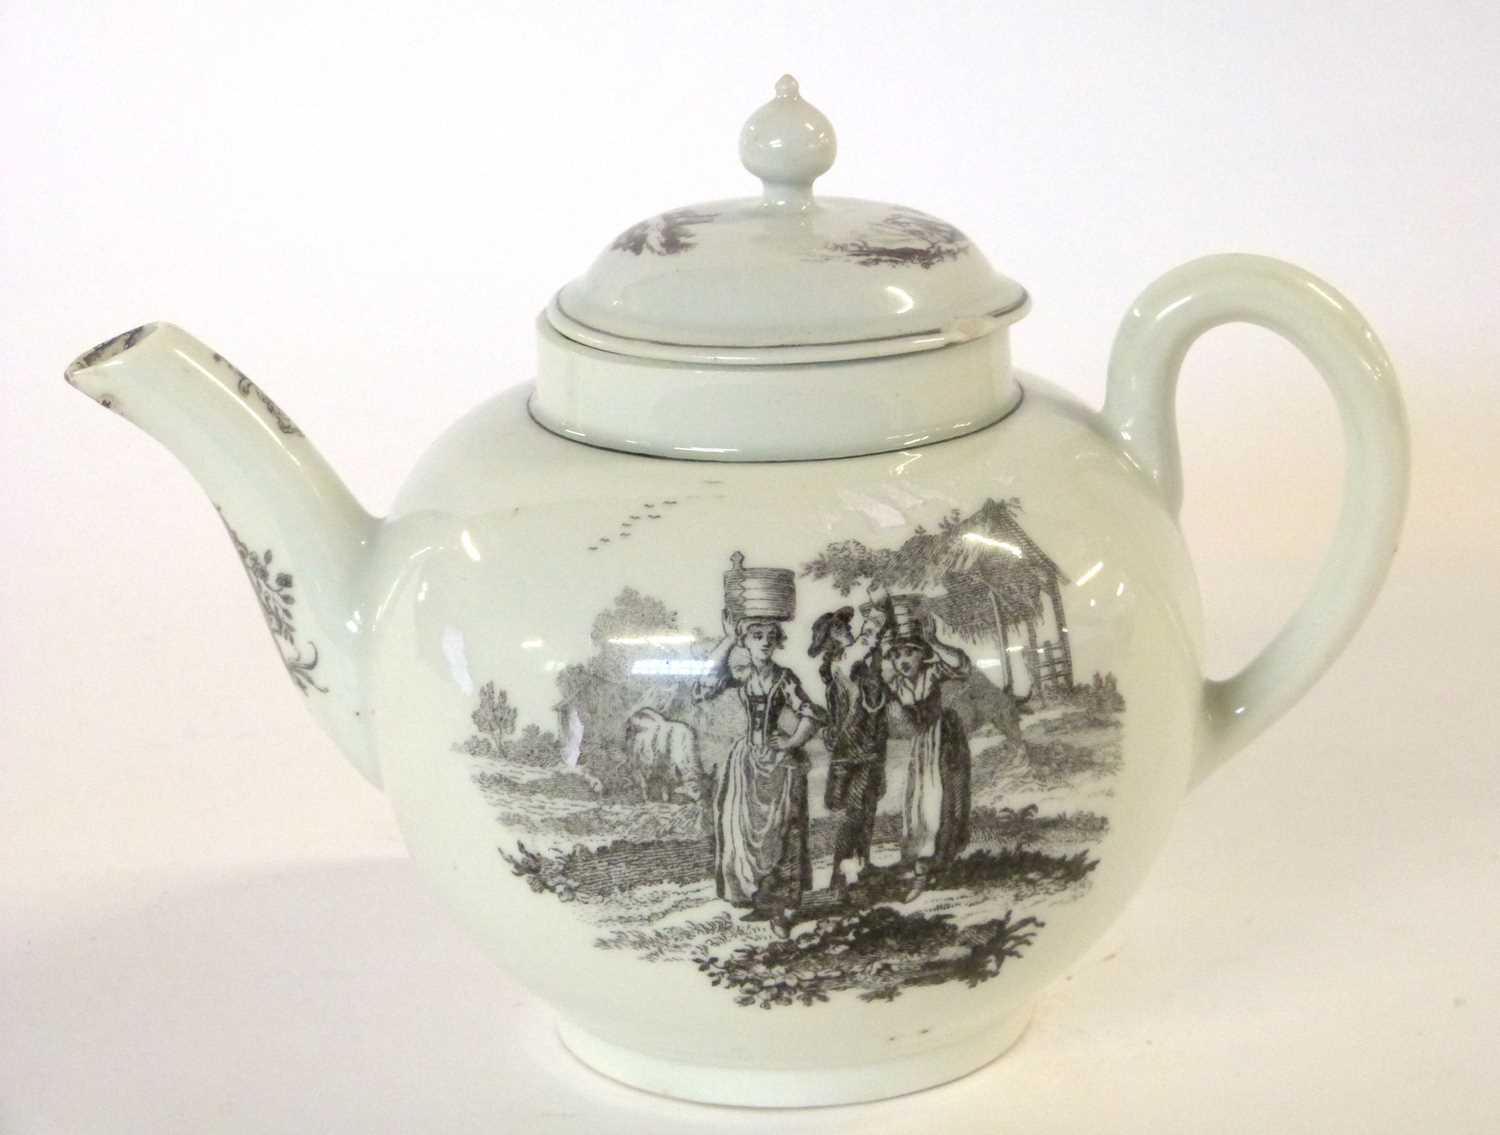 A 18th Century Worcester porcelain teapot decorated with prints of Milkmaids and pastoral scenes - Image 2 of 4